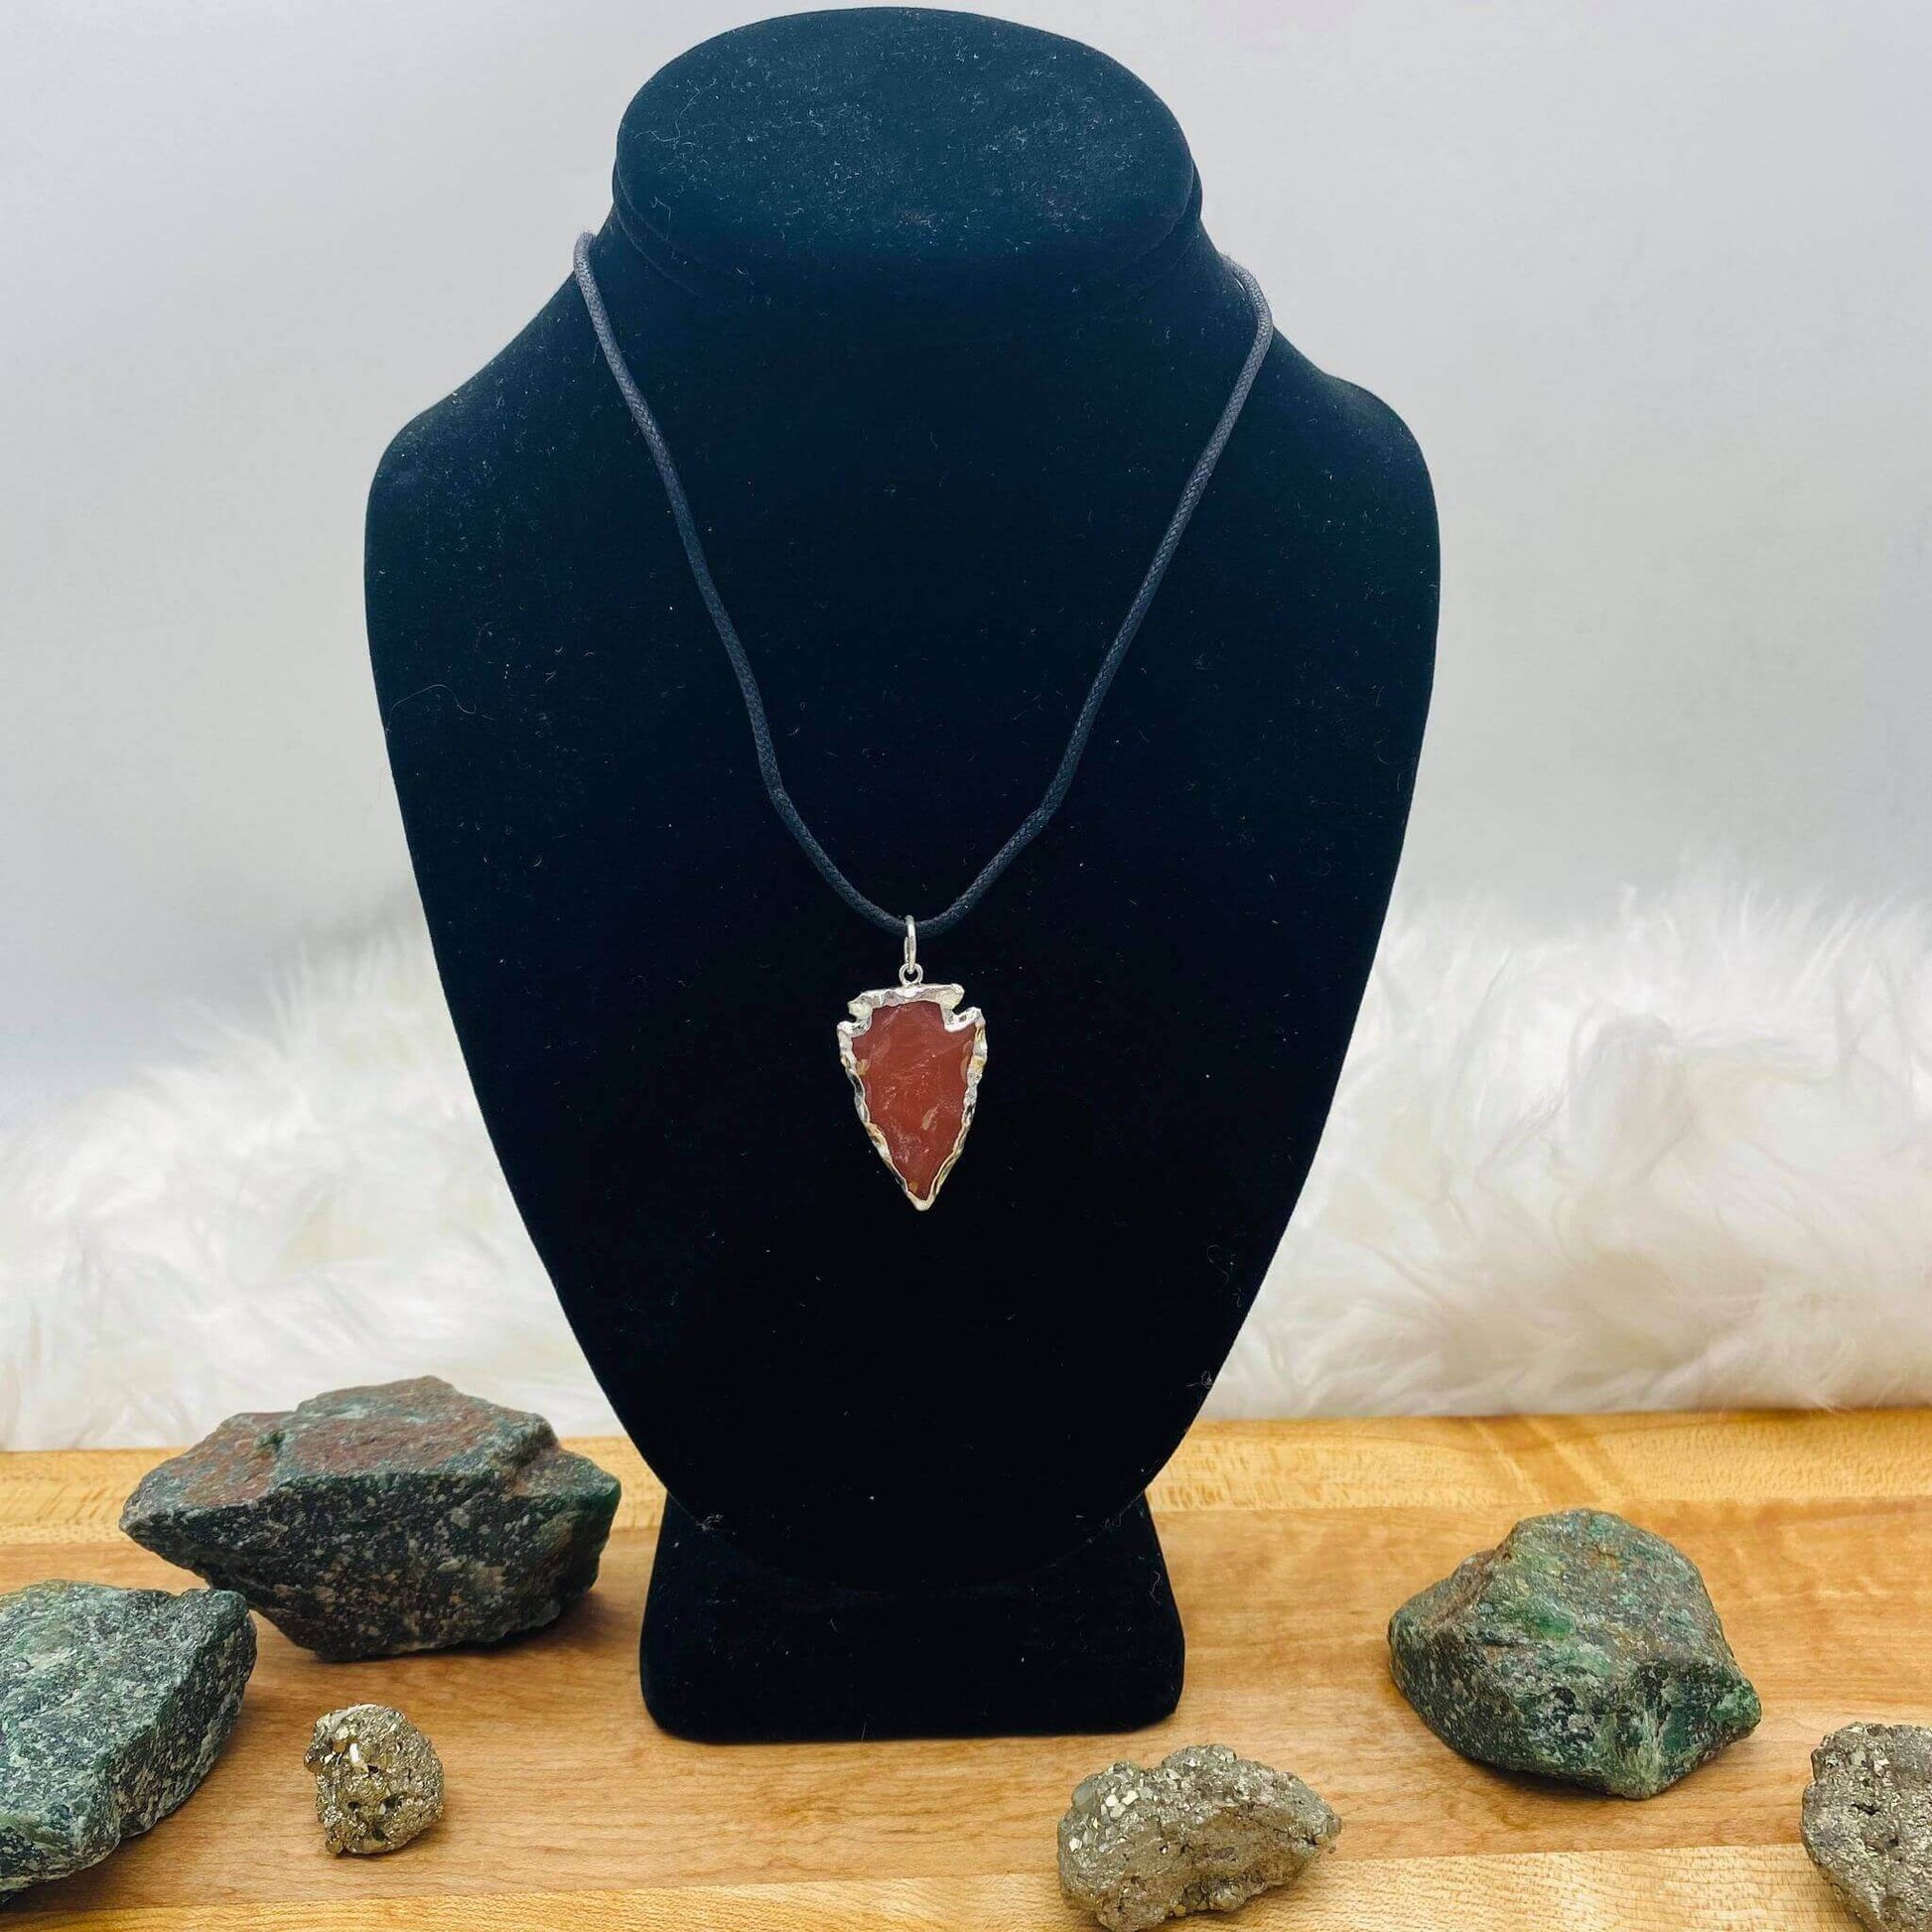 Carnelian Arrowhead Necklace at $25 only from Spiral Rain